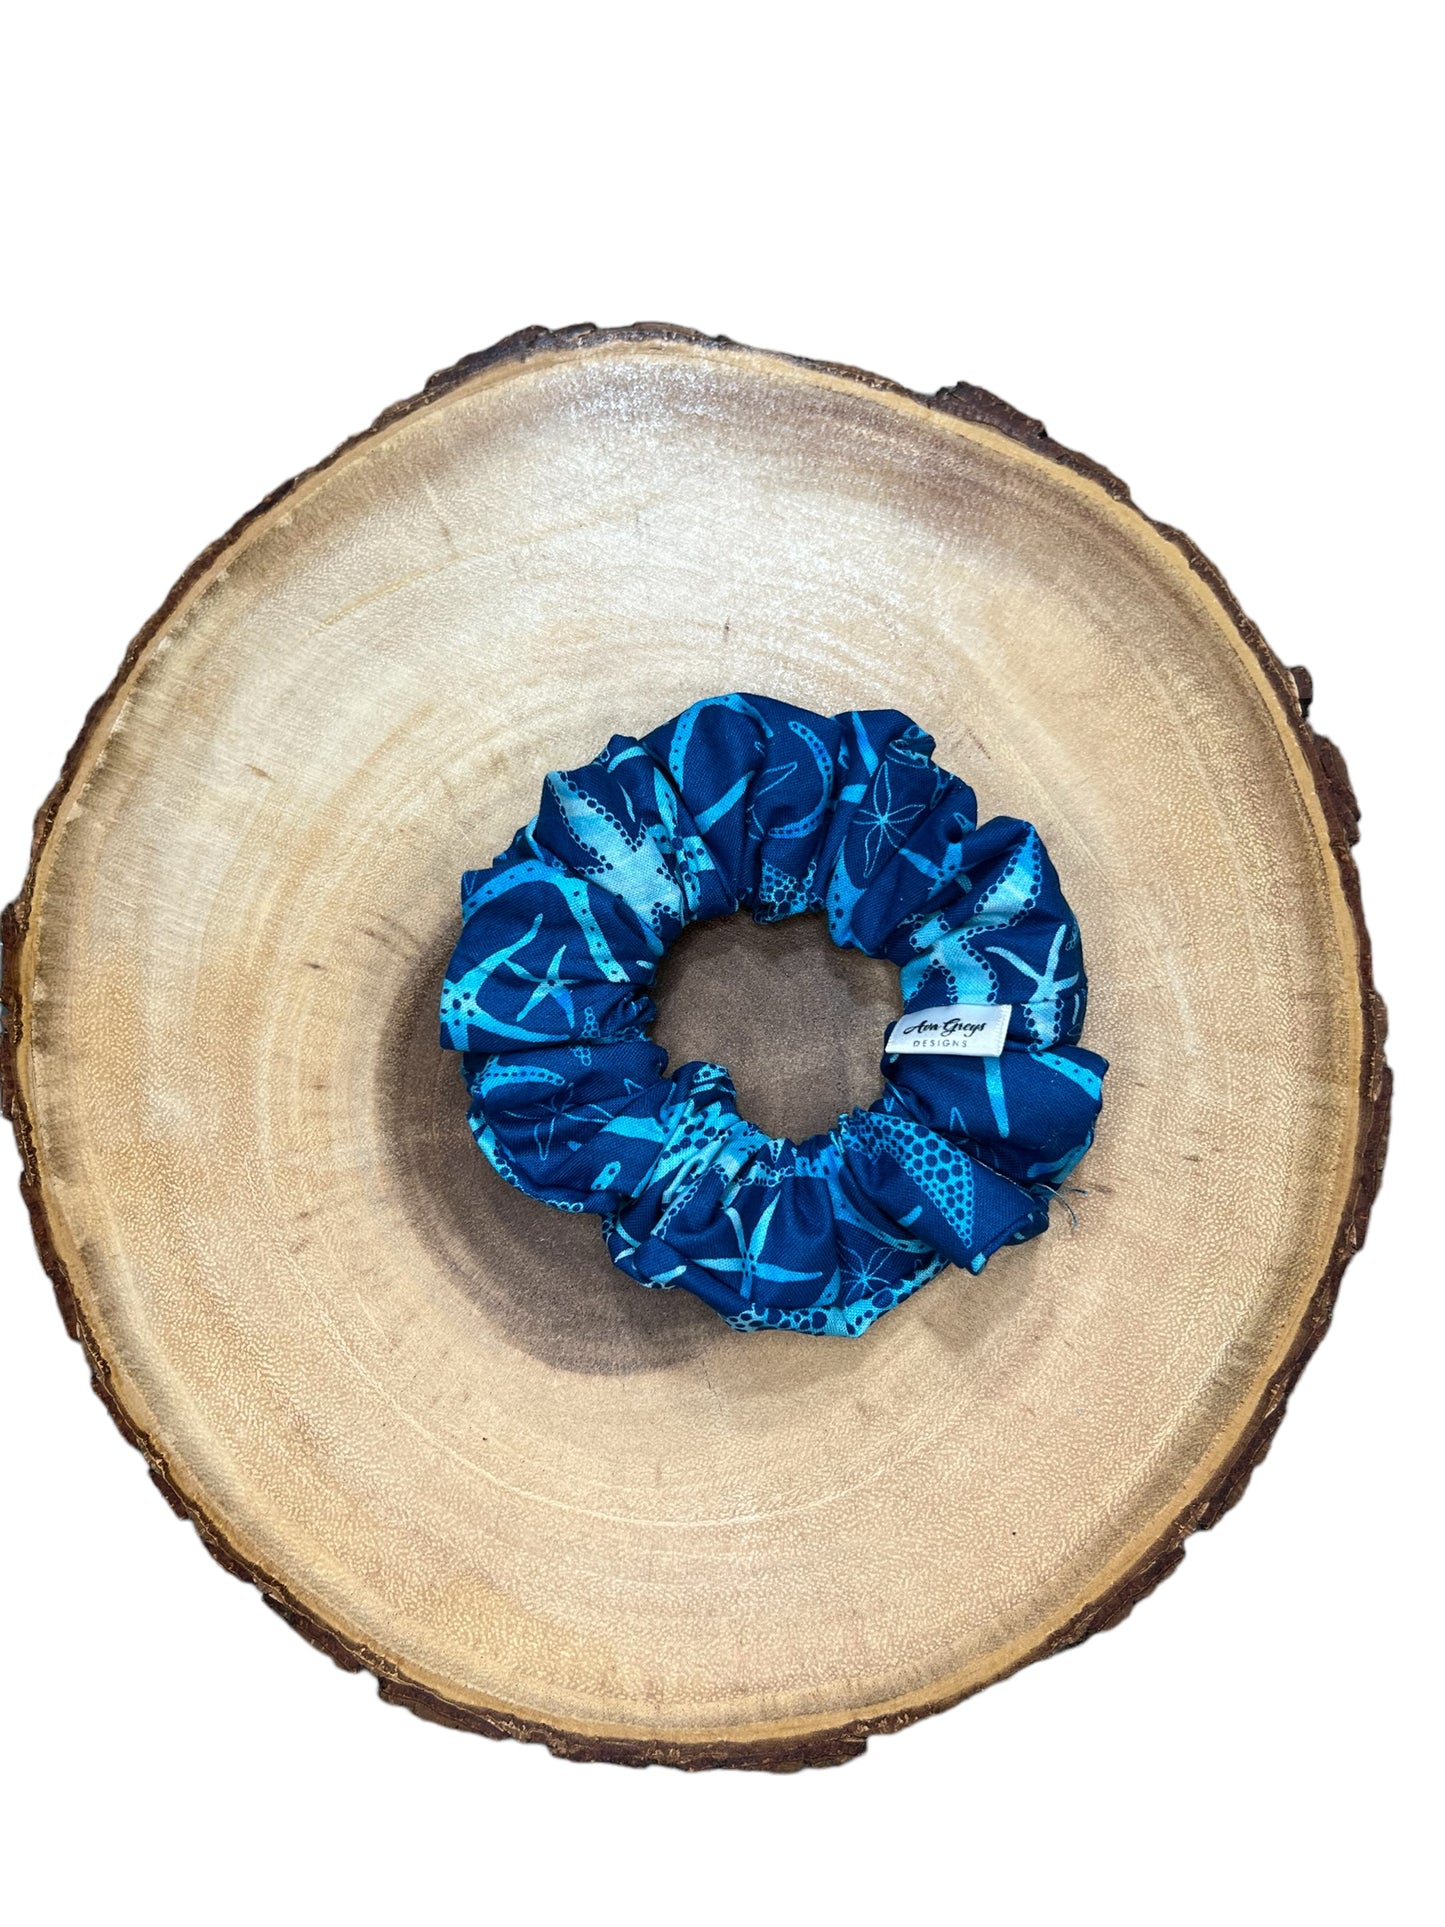 Scrunchie Set or Individual- Under the Sea